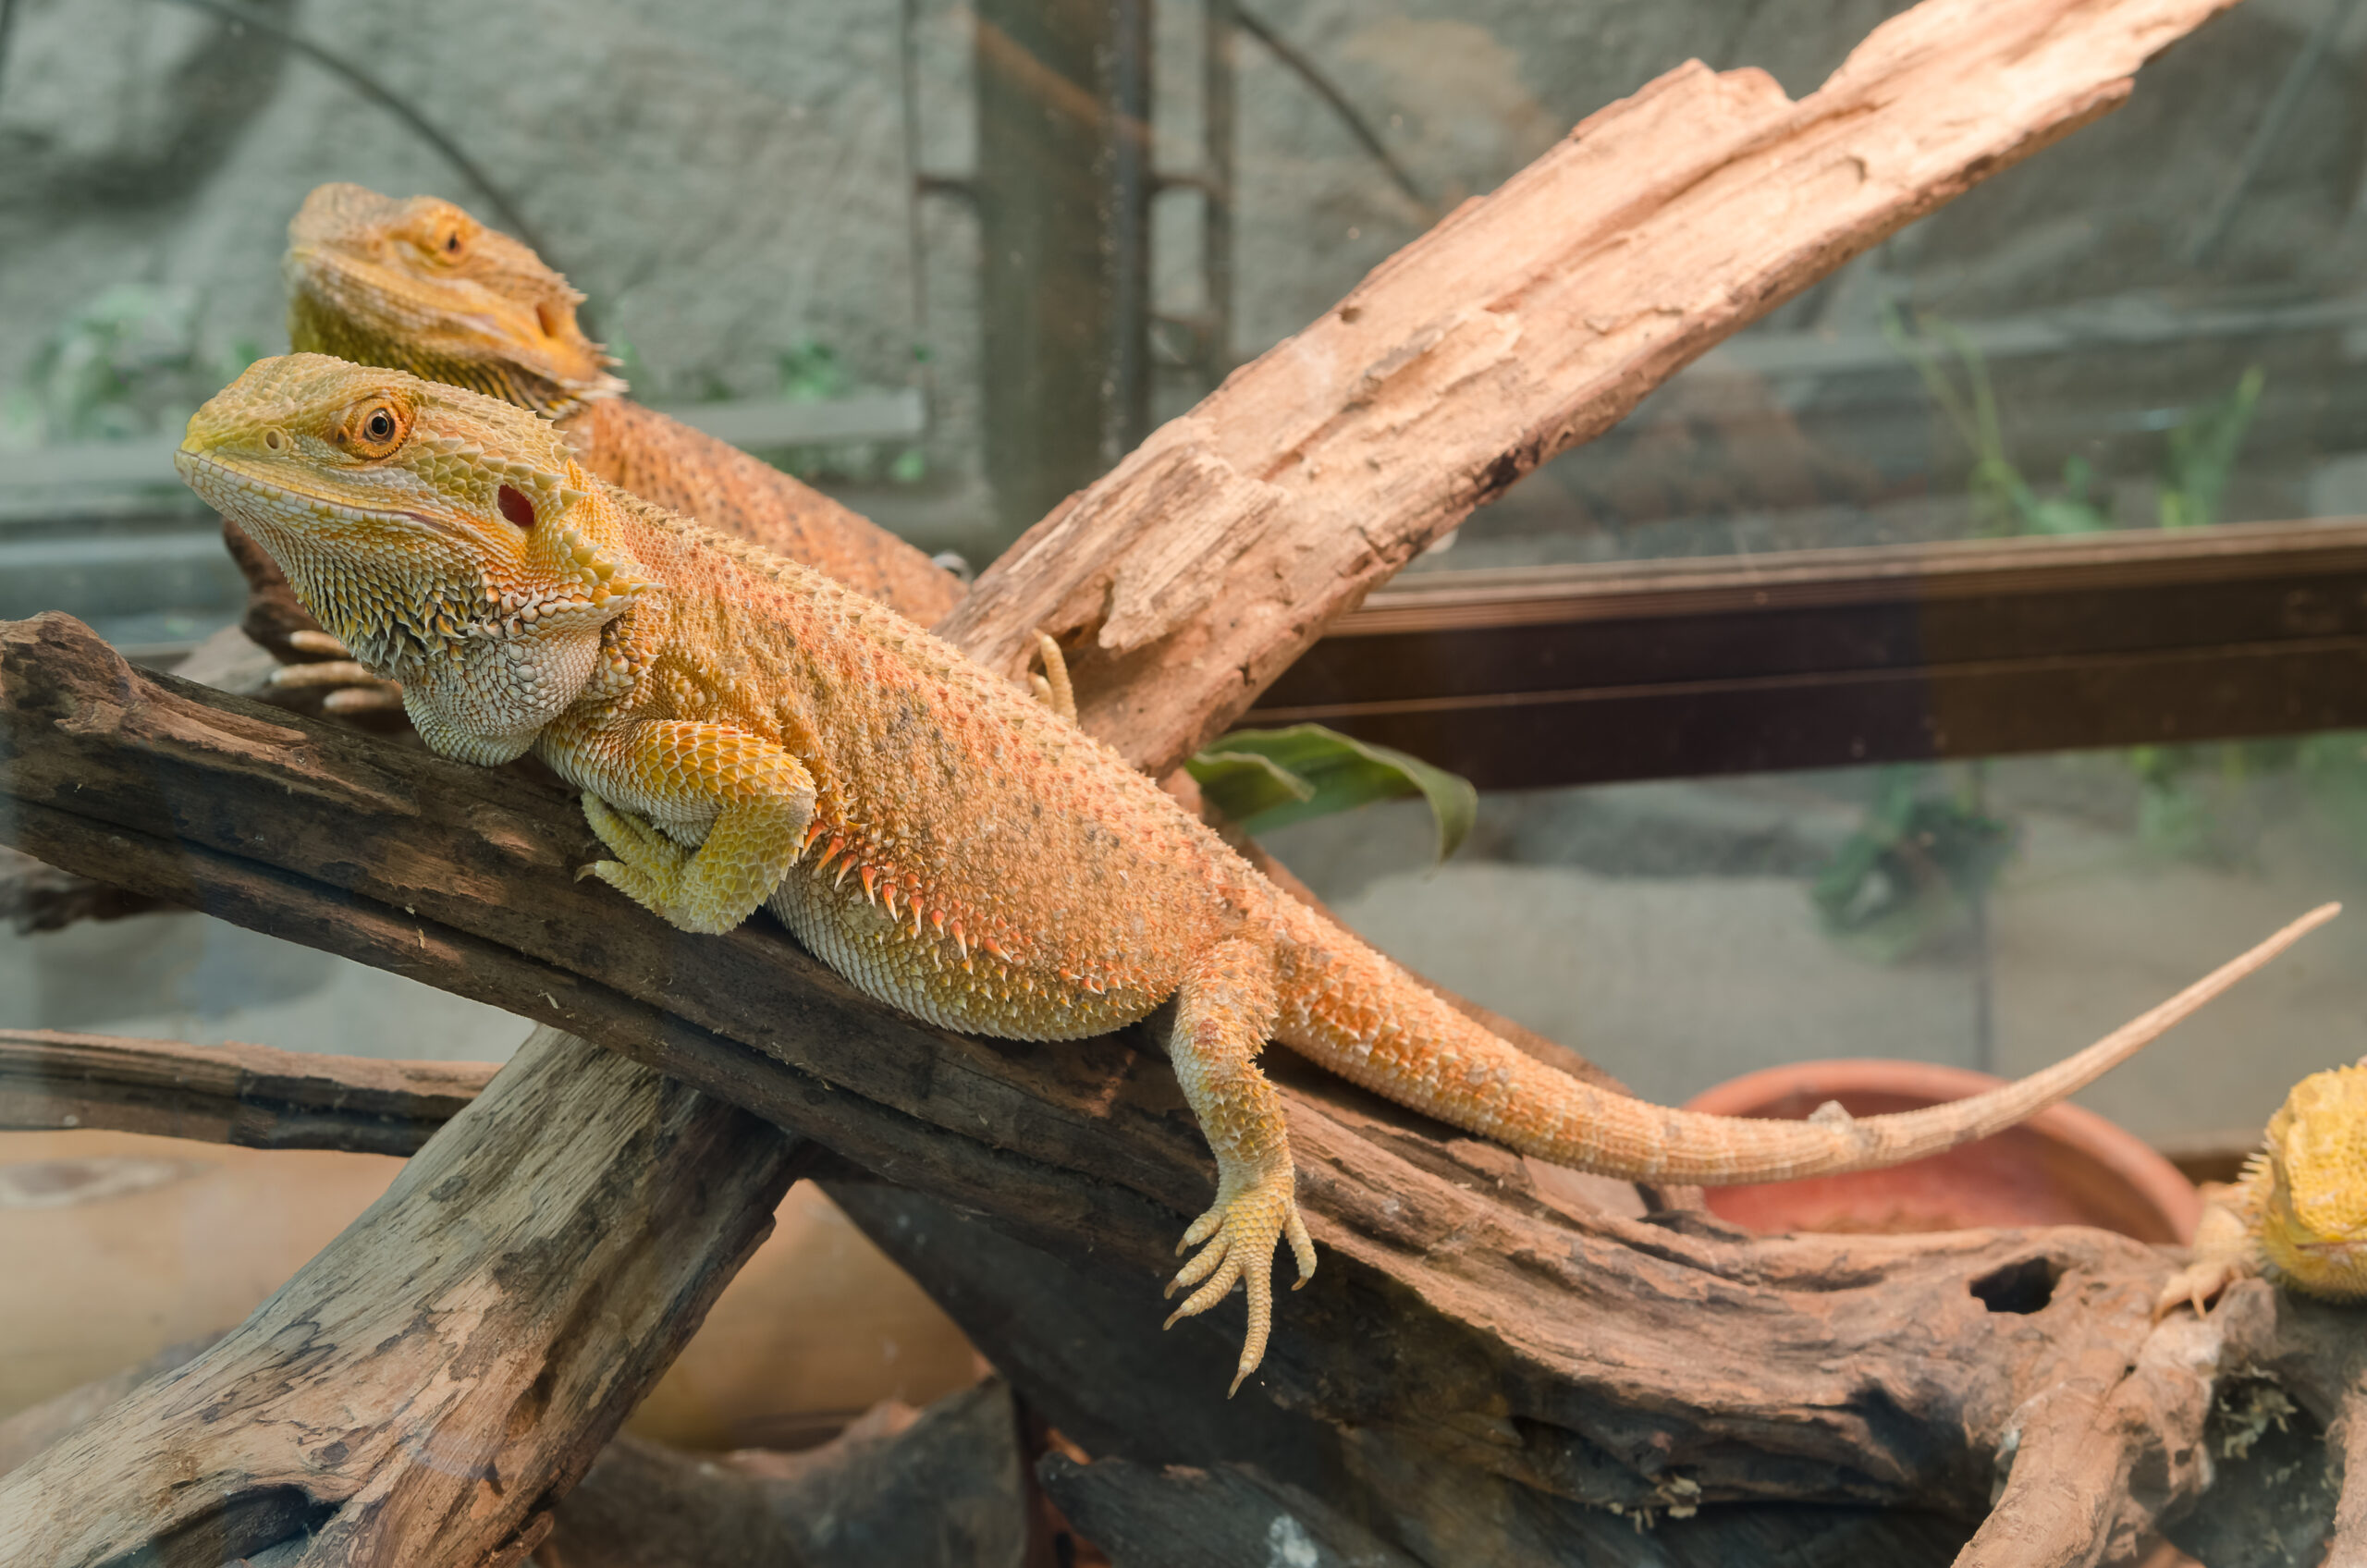 How To Identify Upper Respiratory Infections in My Reptile